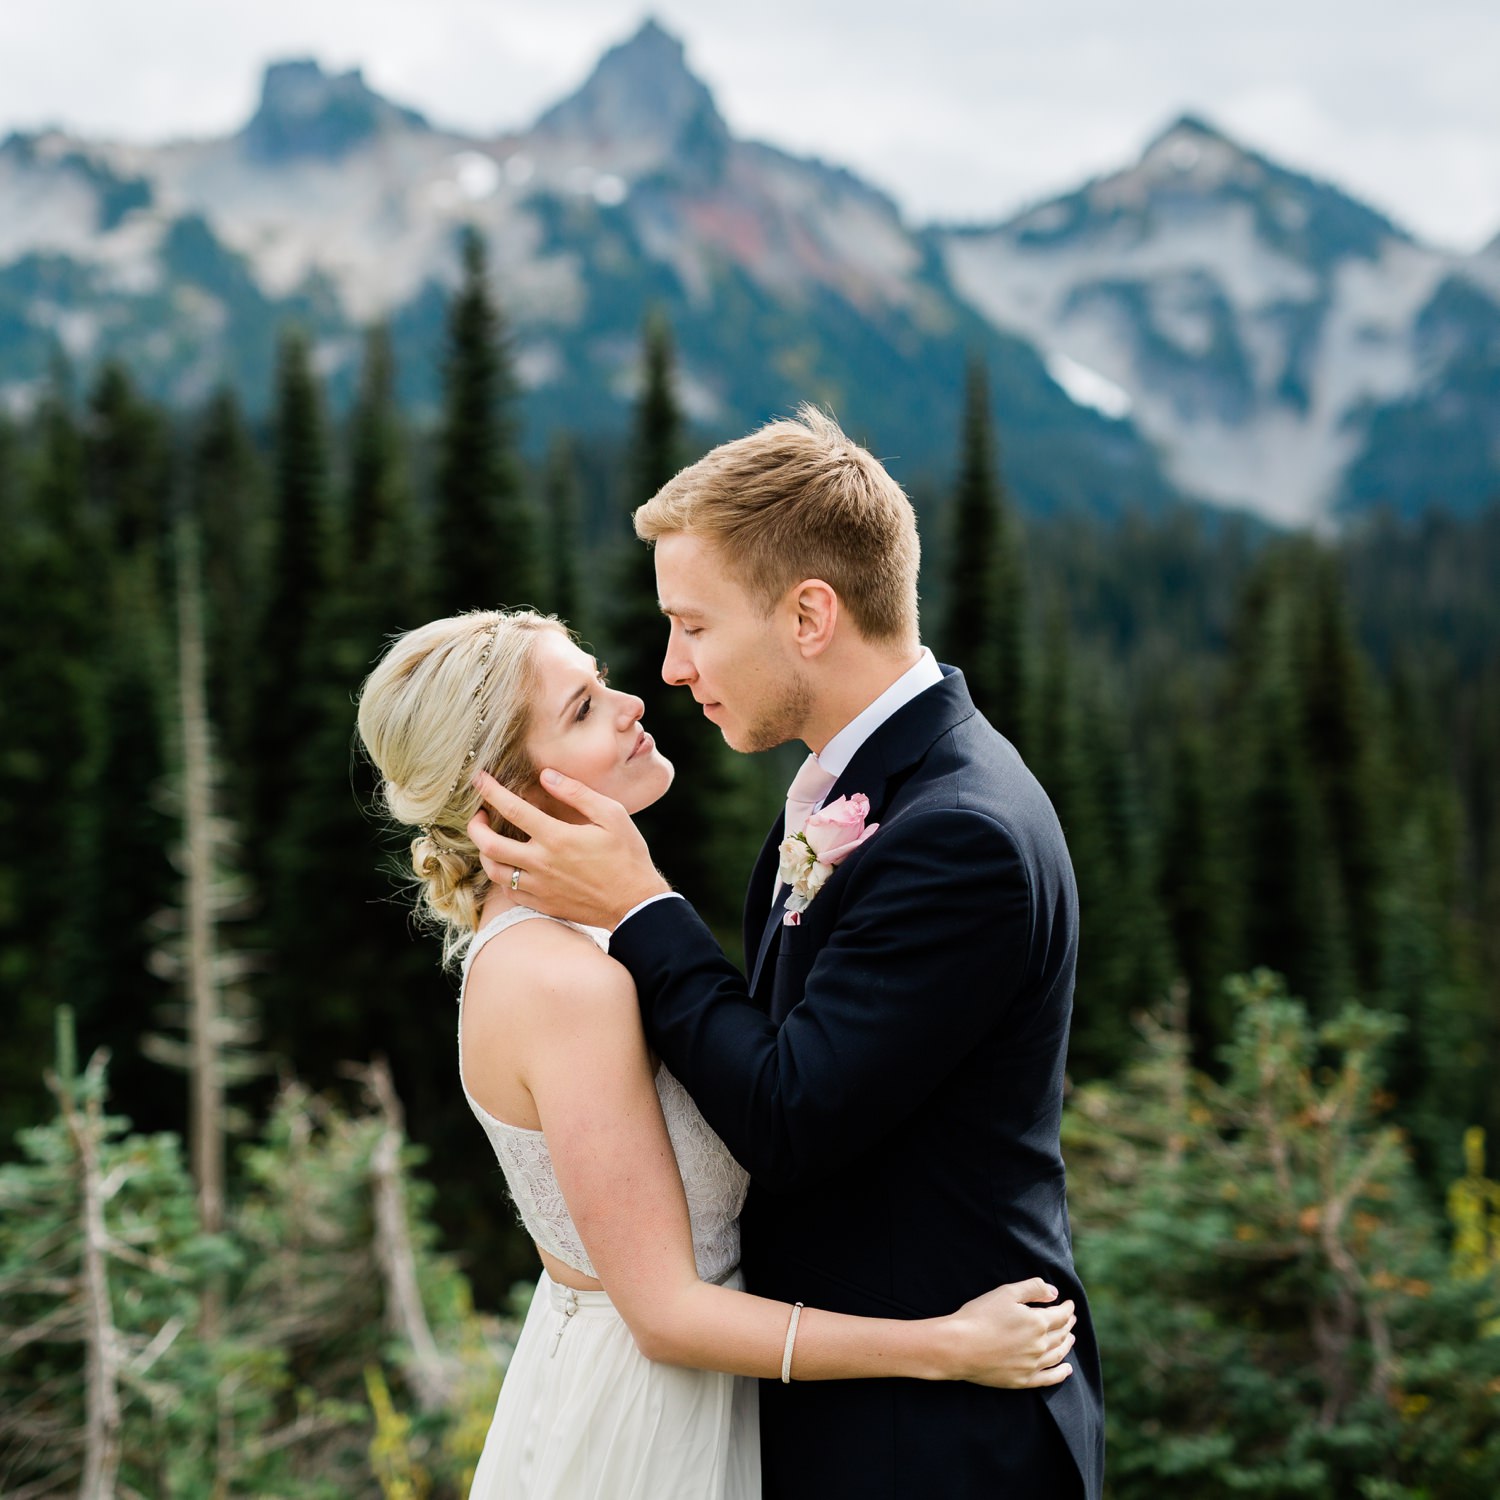 couple eloping at mount rainier national park